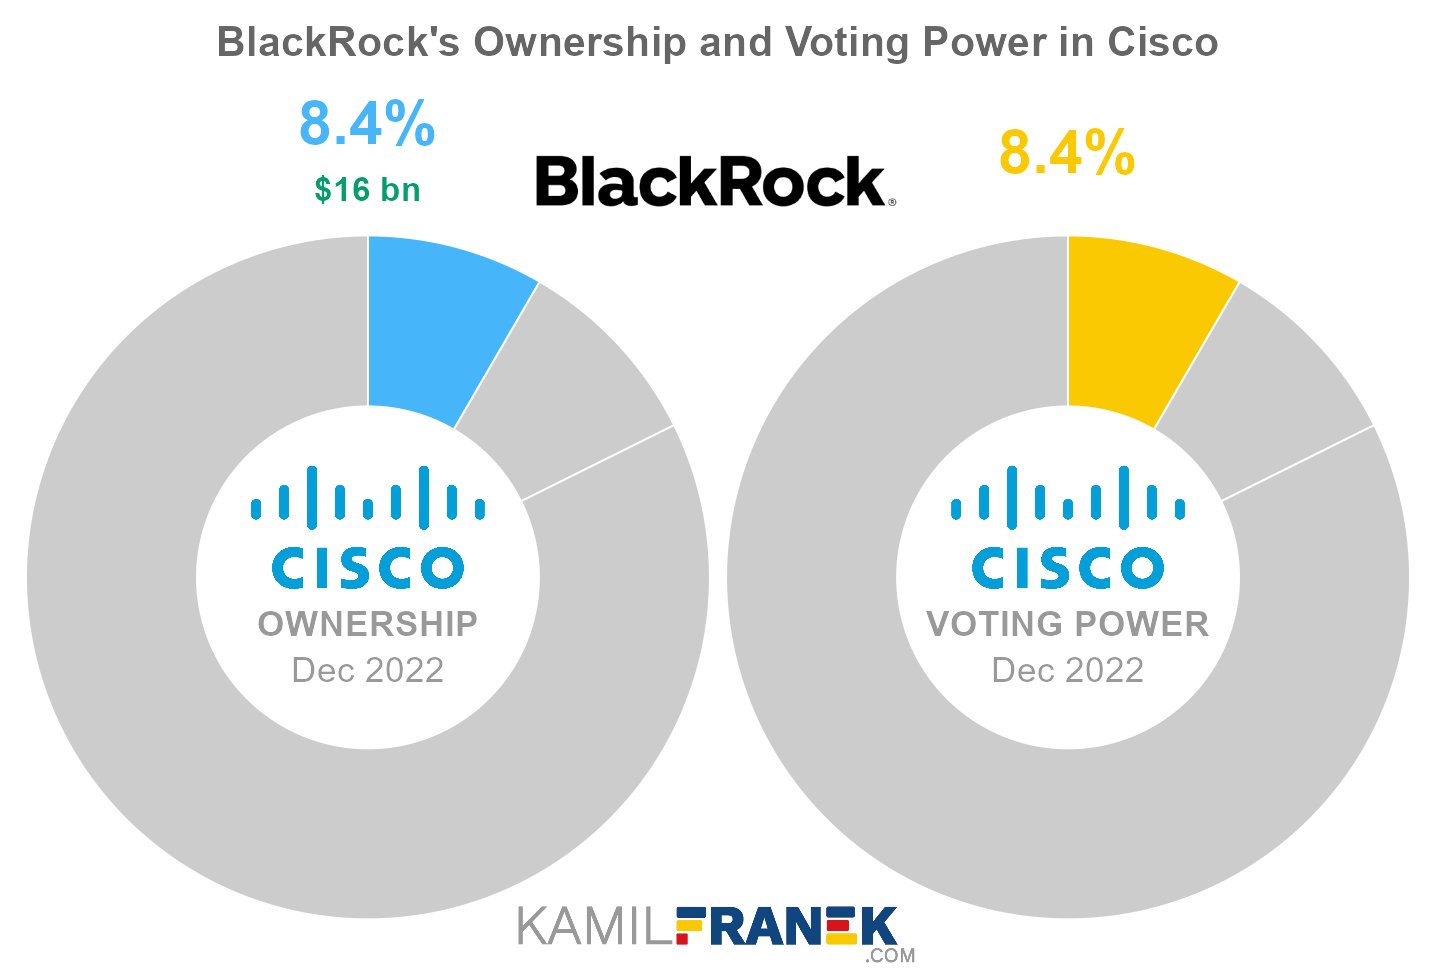 BlackRock's share ownership and voting power in Cisco (chart)